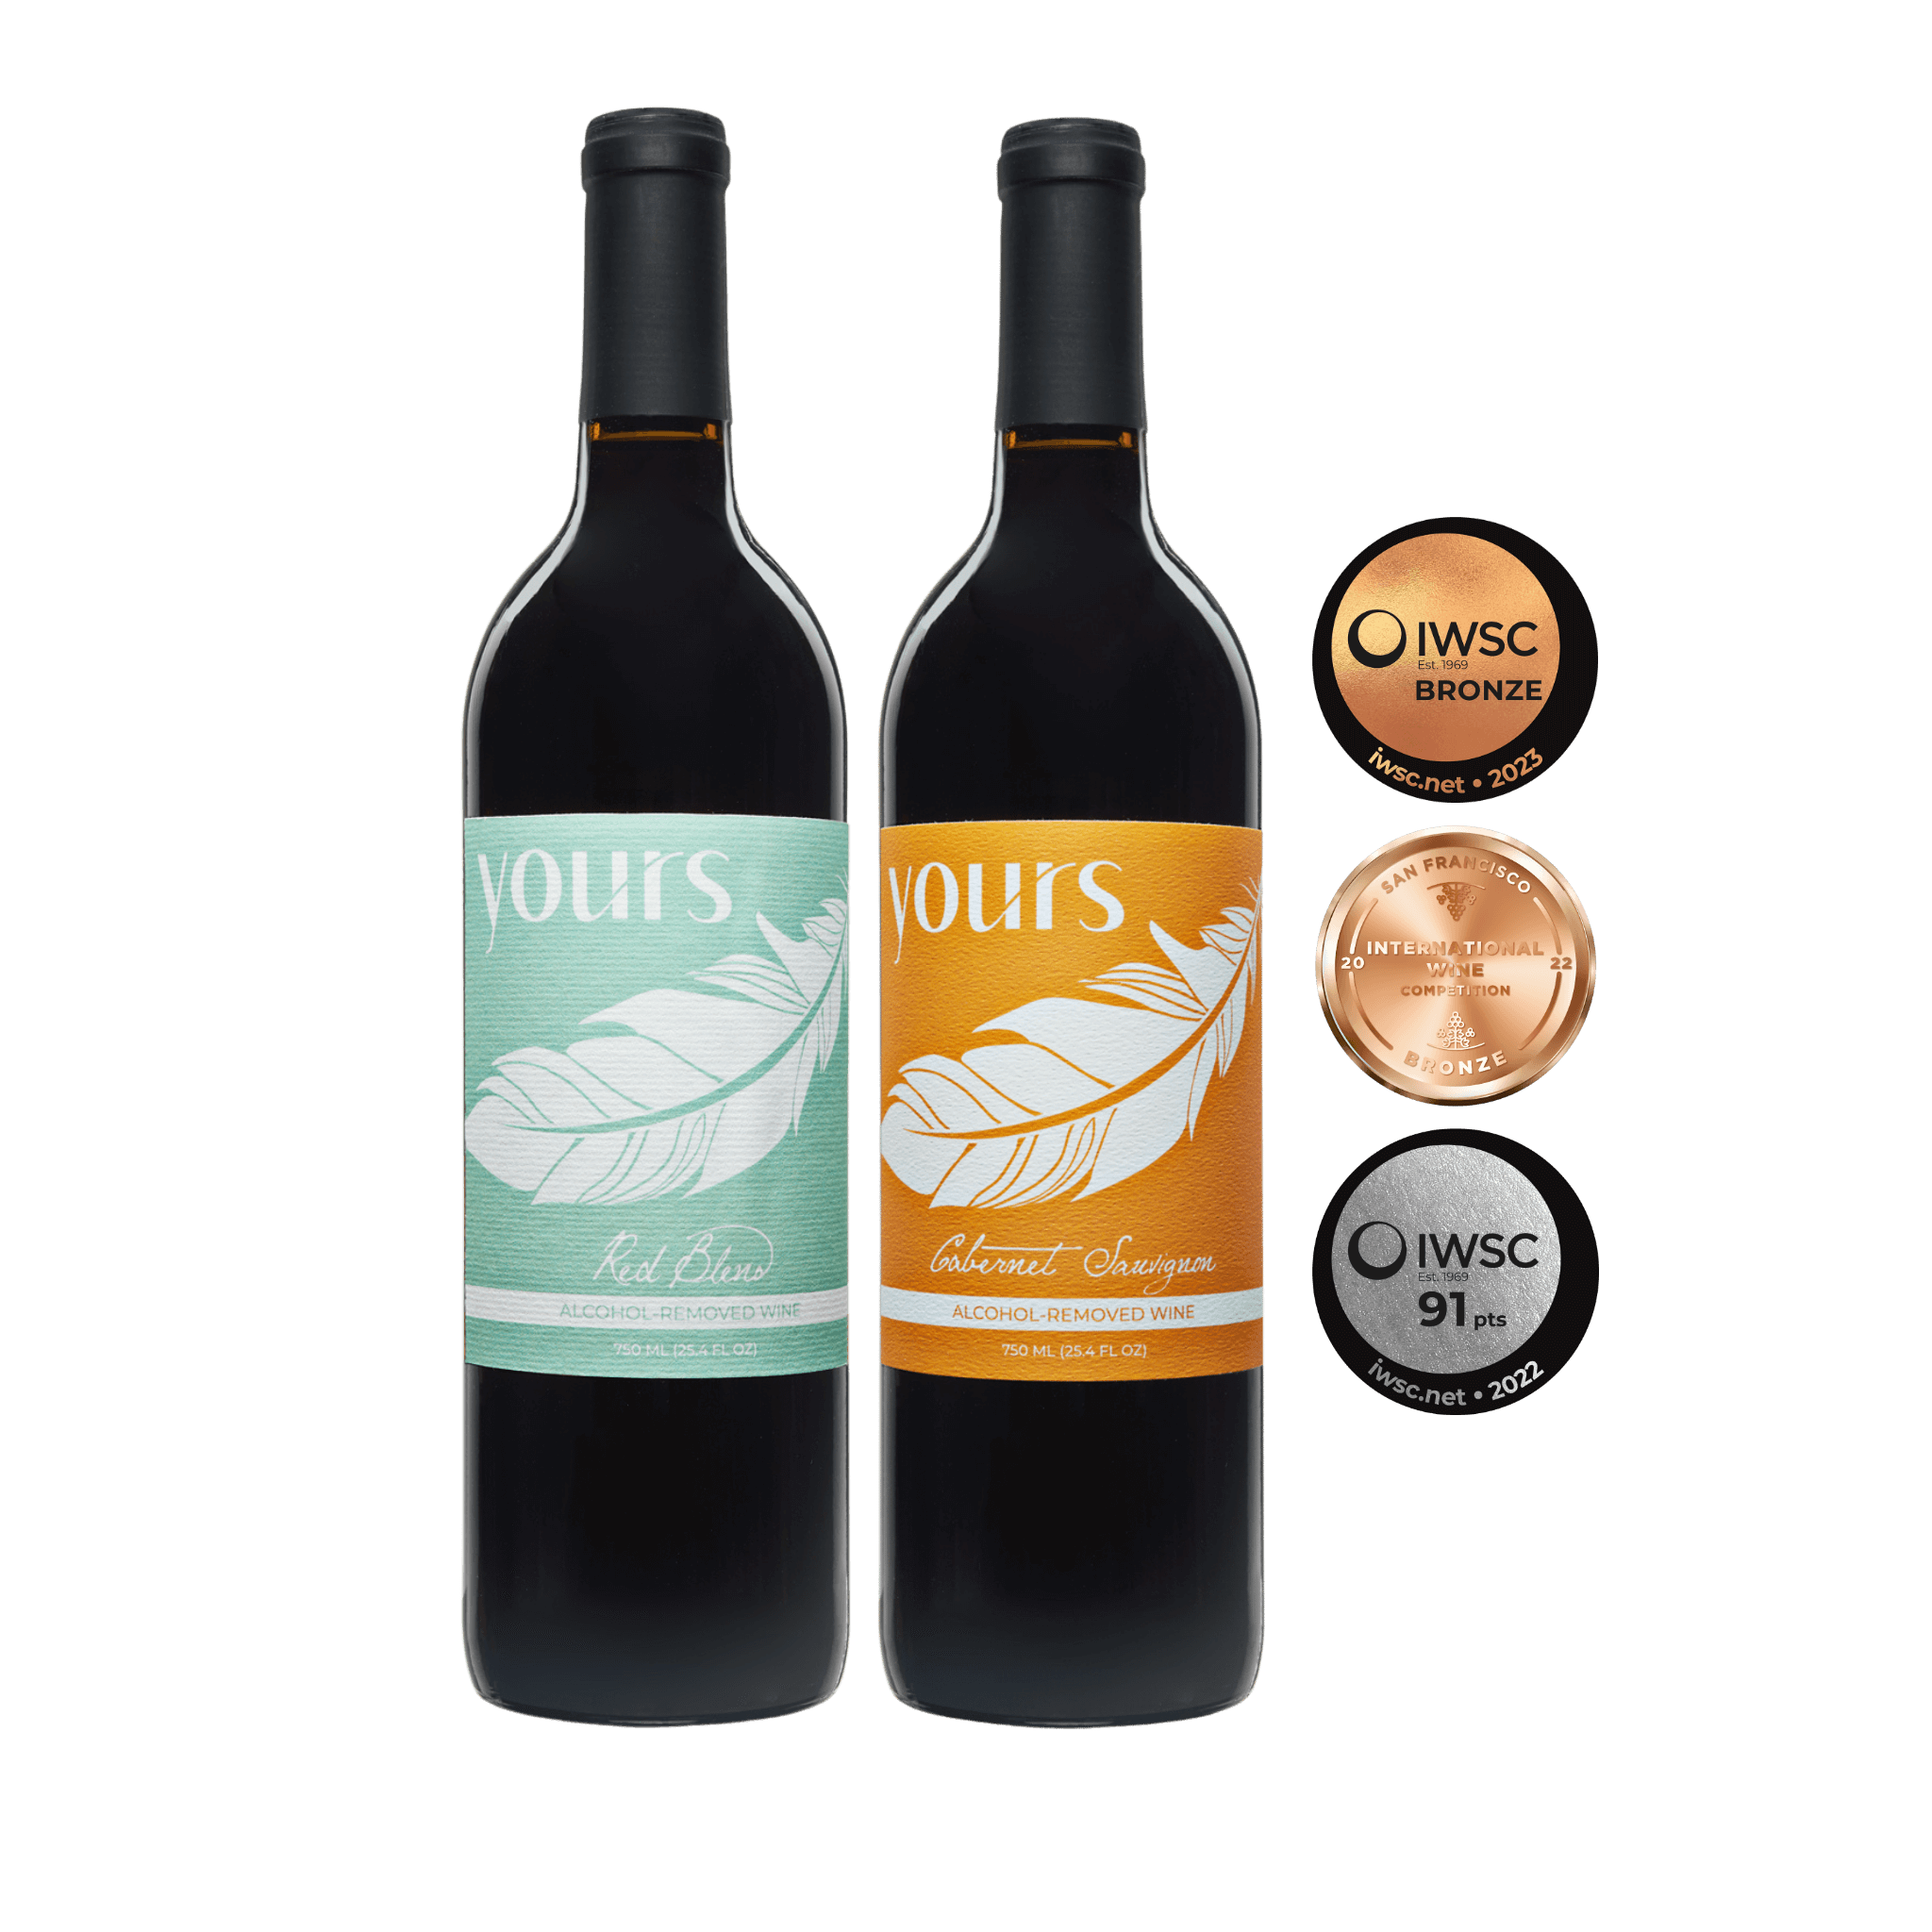 YOURS Non-Alcoholic Wine - The Reds - Award-Winning Kit